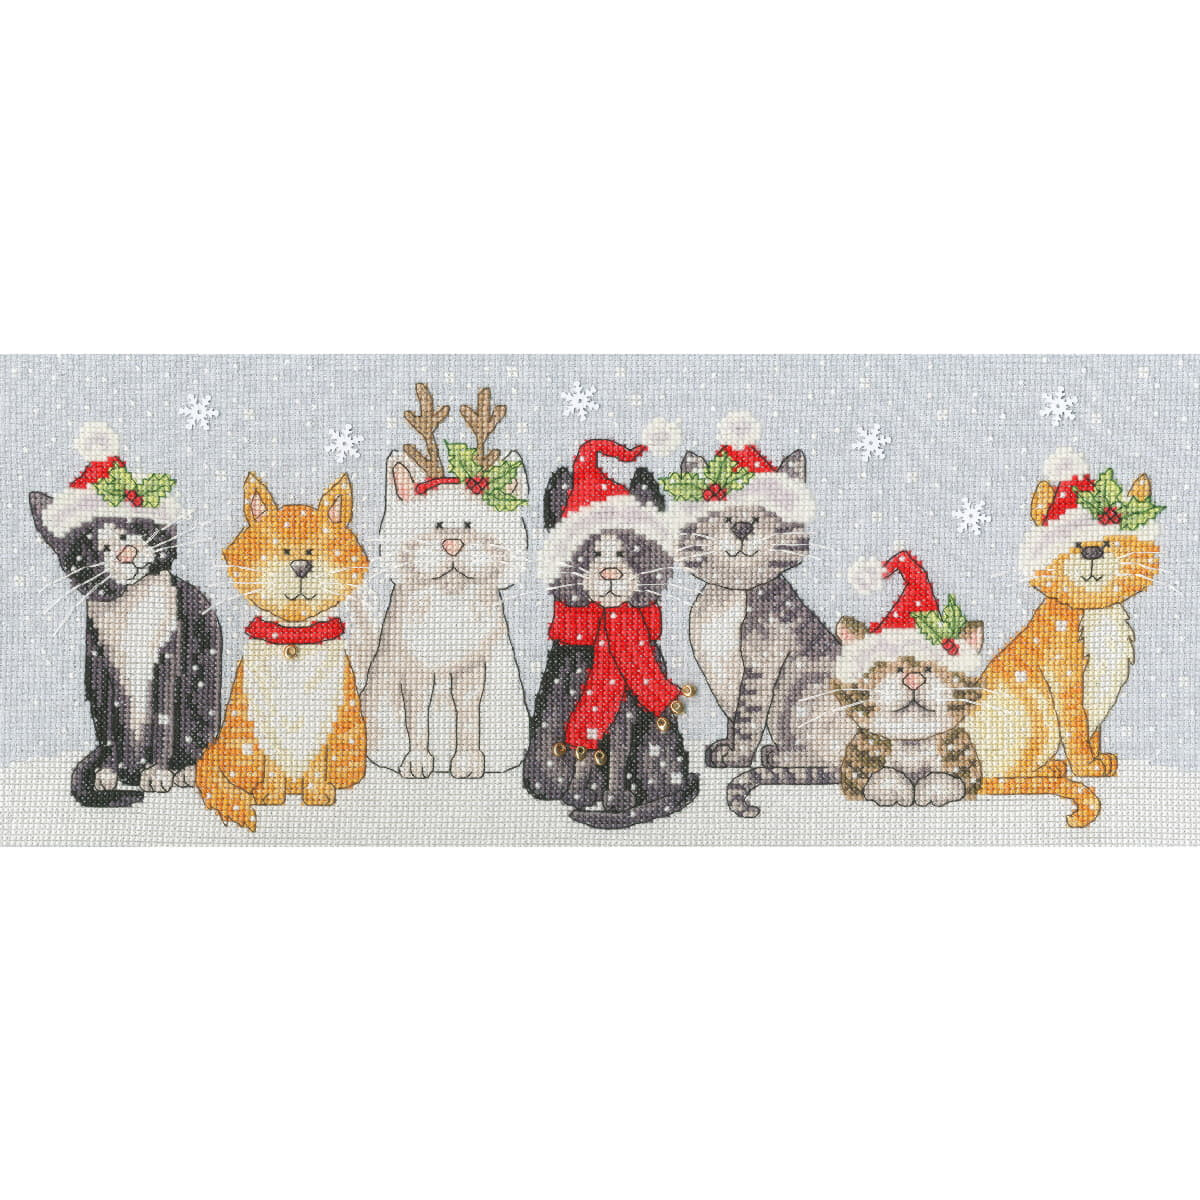 Bothy Threads counted cross stitch kit "Festive...